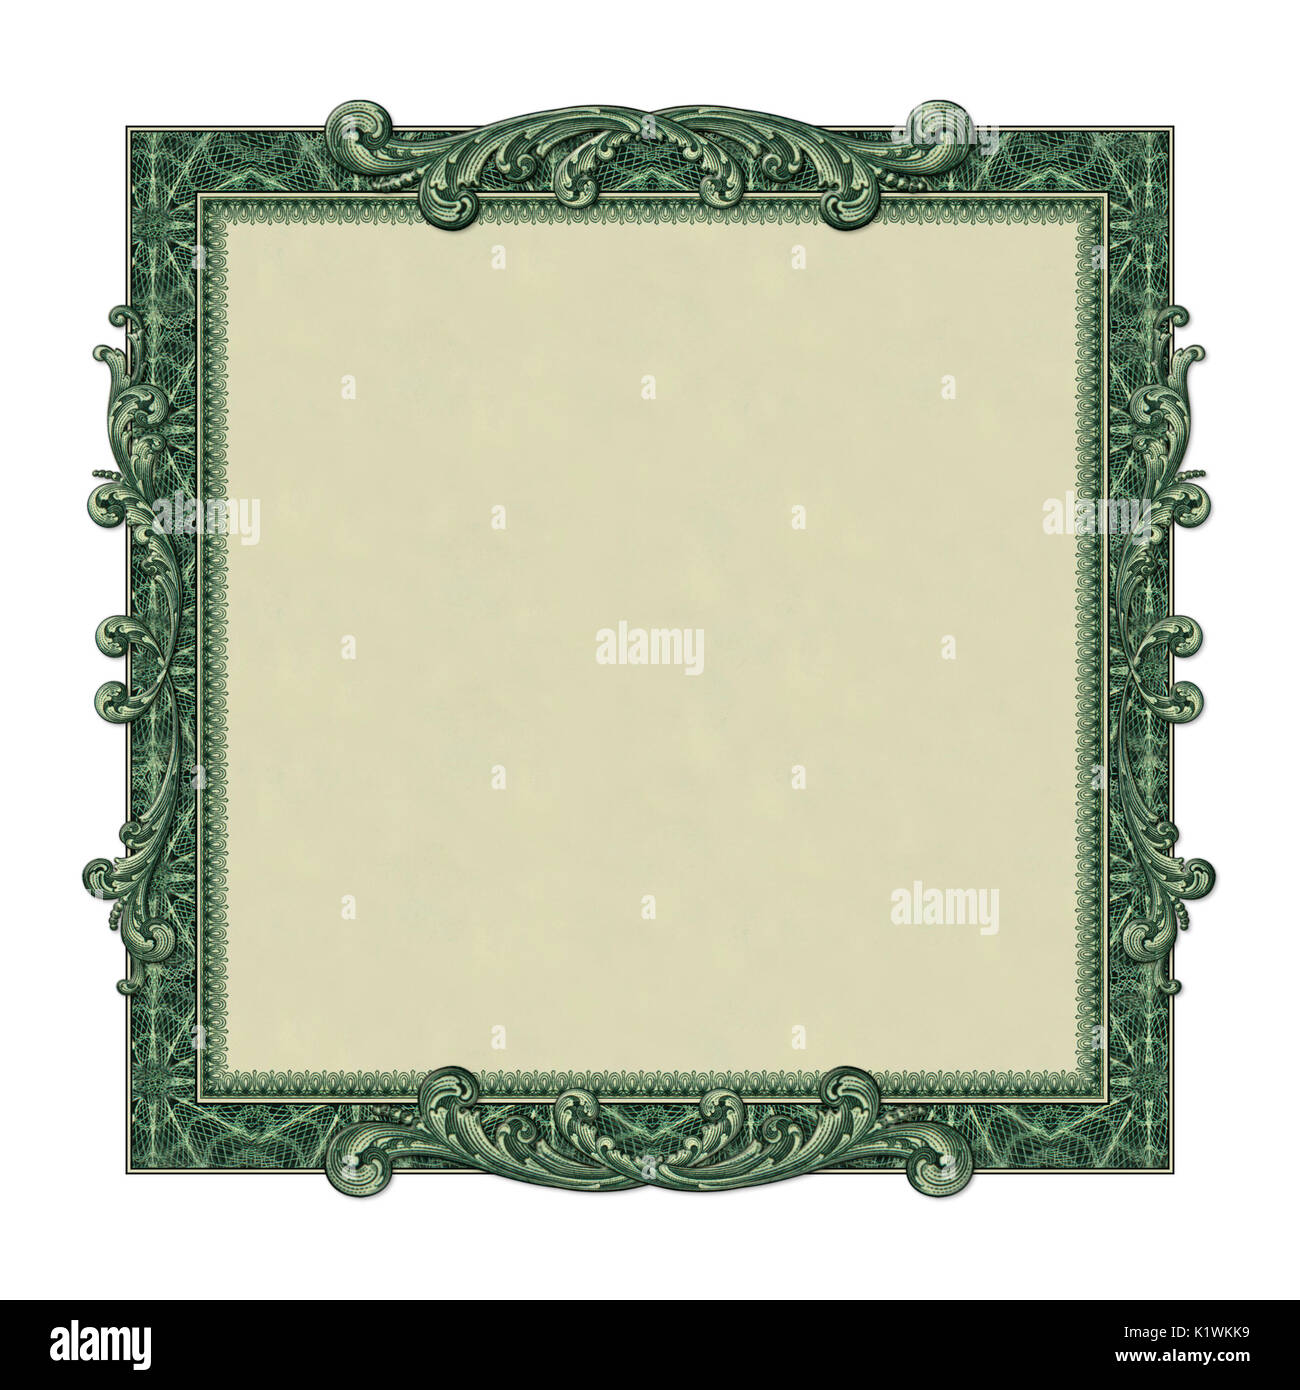 Photo-illustration of a border/frame using elements from a dollar bill ...